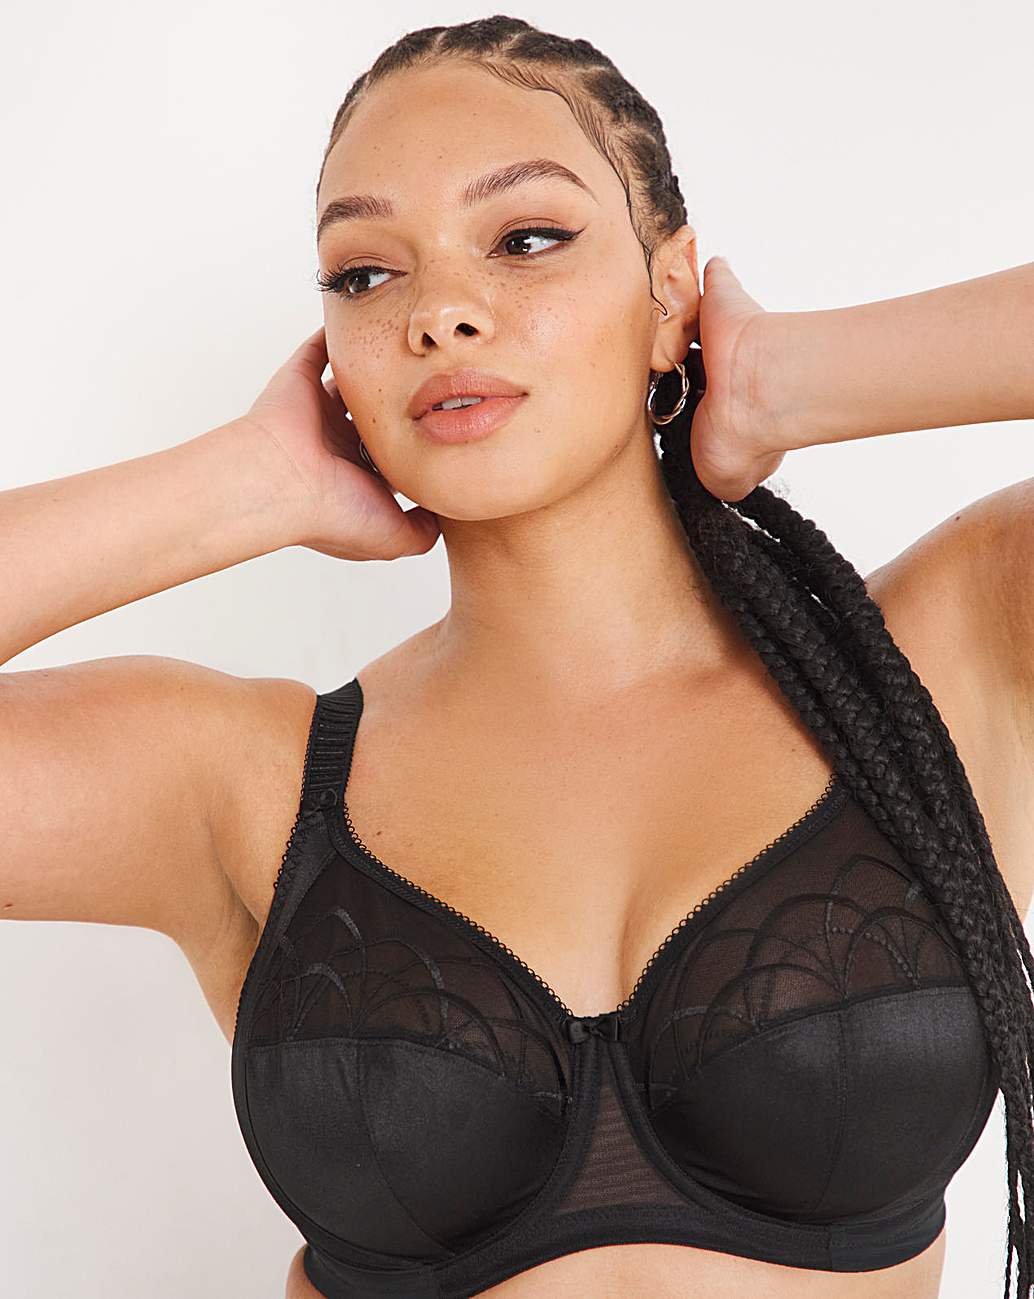 Cate Wired Full Cup Bra DD-K, Elomi